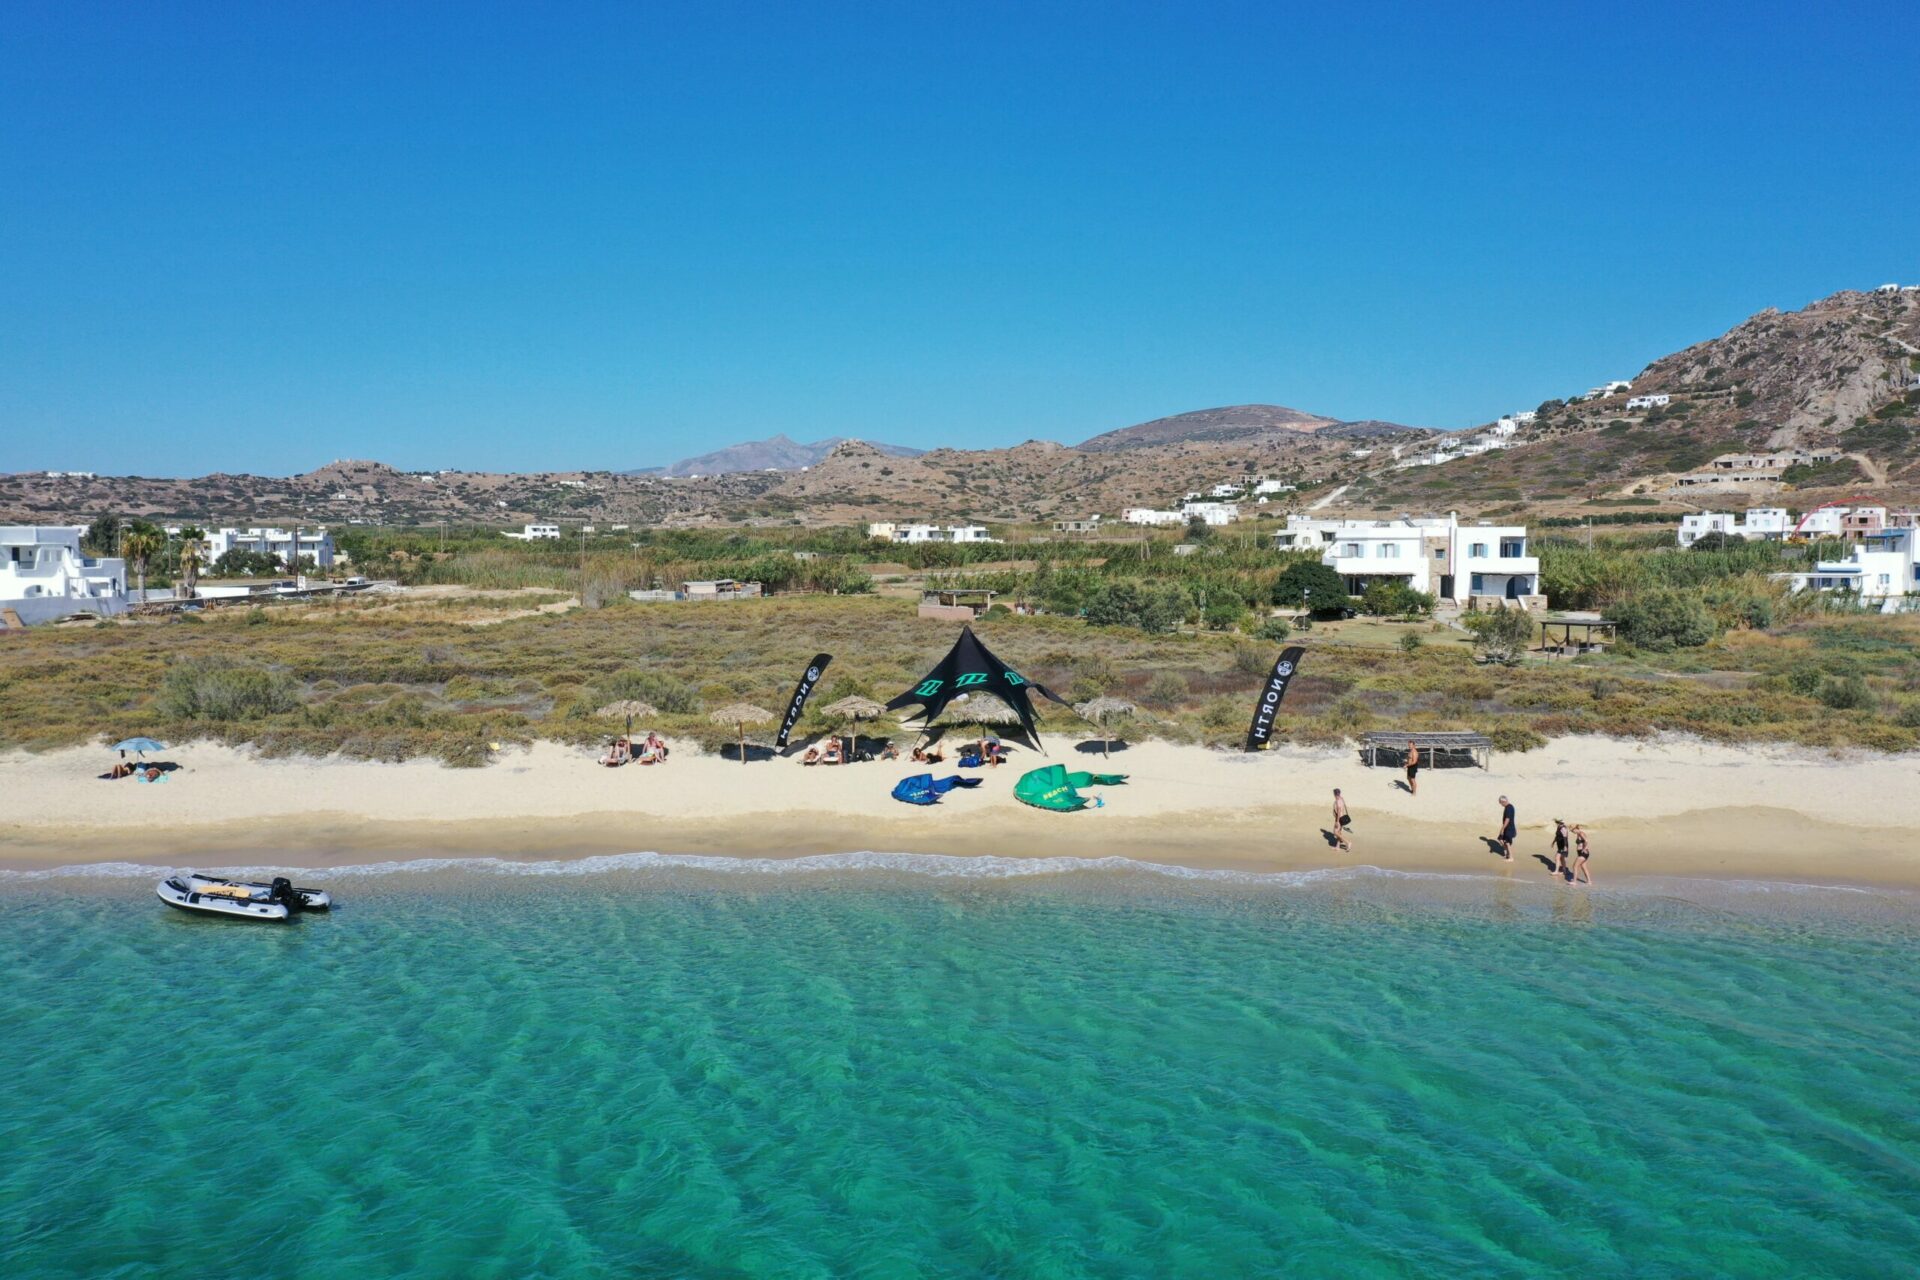 Golden sandy beach, crystal blue water and the tent of Amouditis Kite Center